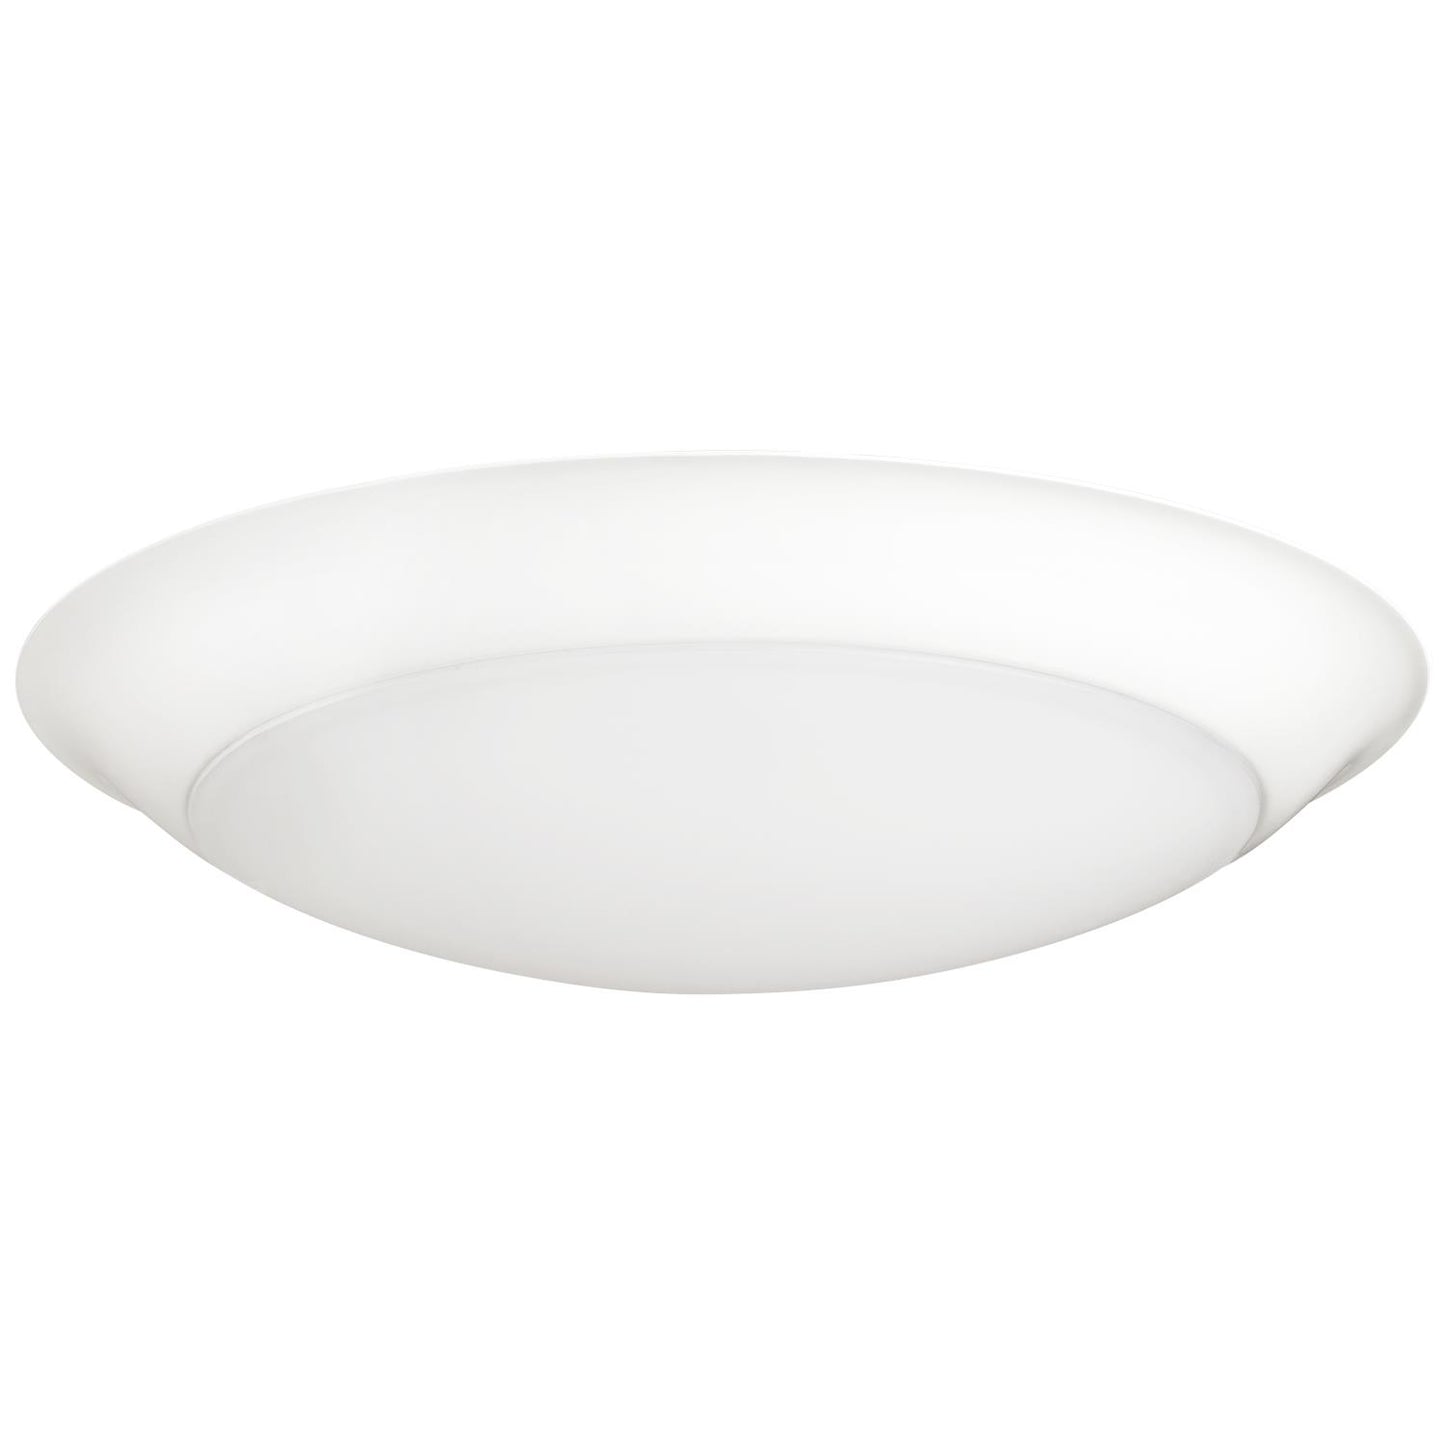 Sunlite 88381-SU LED 6-Inch Slim Disc Ceiling Fixture, 13 Watts (100W Equivalent), 750 Lumens, 90 CRI, Dimmable, White Trim, Energy Star, UL Listed, 30K - Warm White 1 Pack